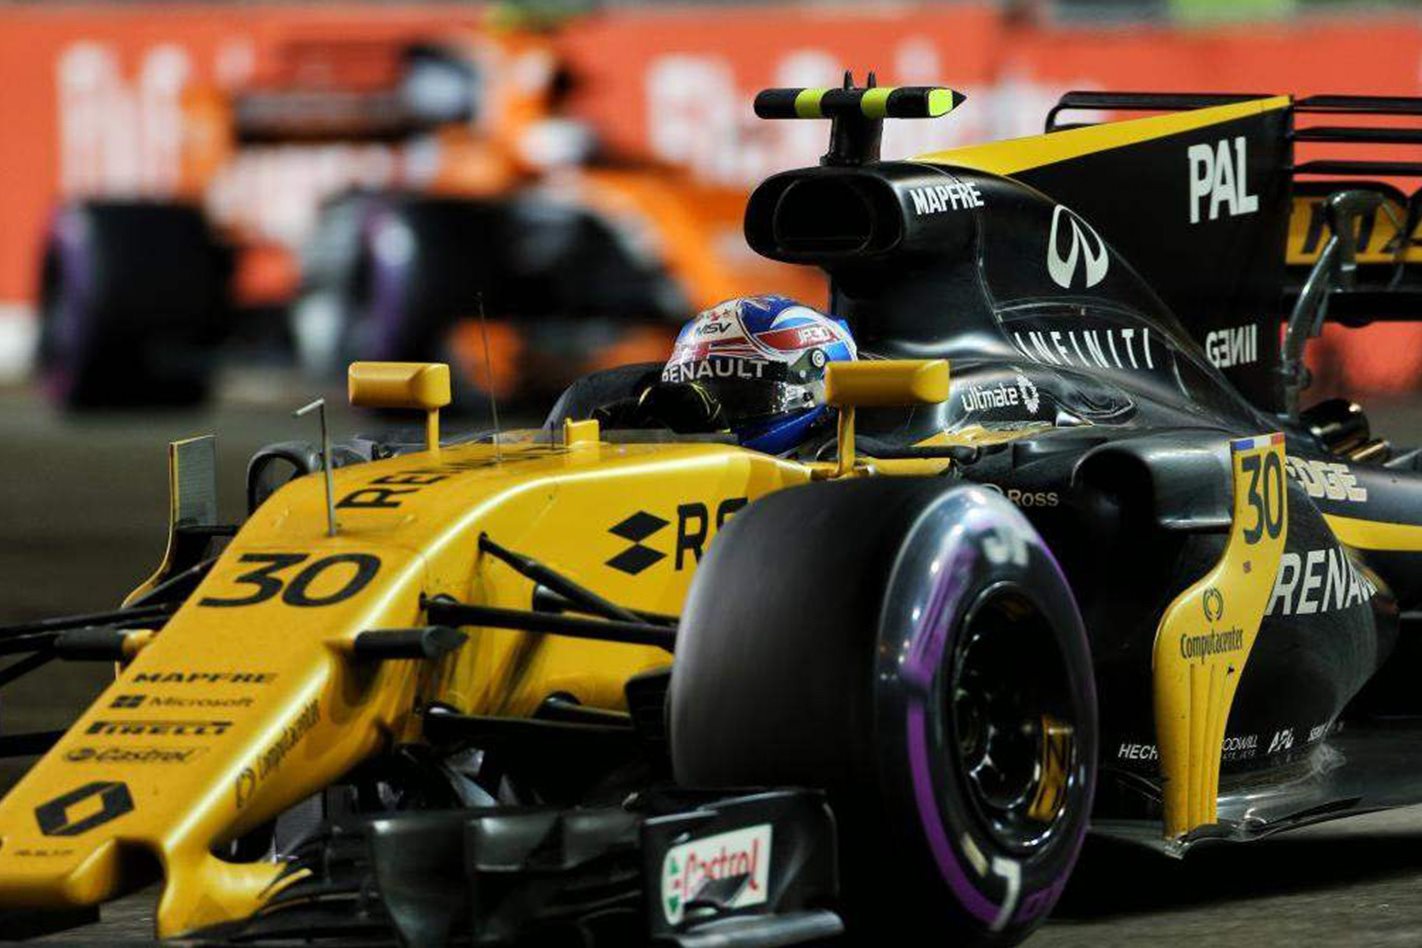 Young Australian engineer wins dream job with Renault F1 team